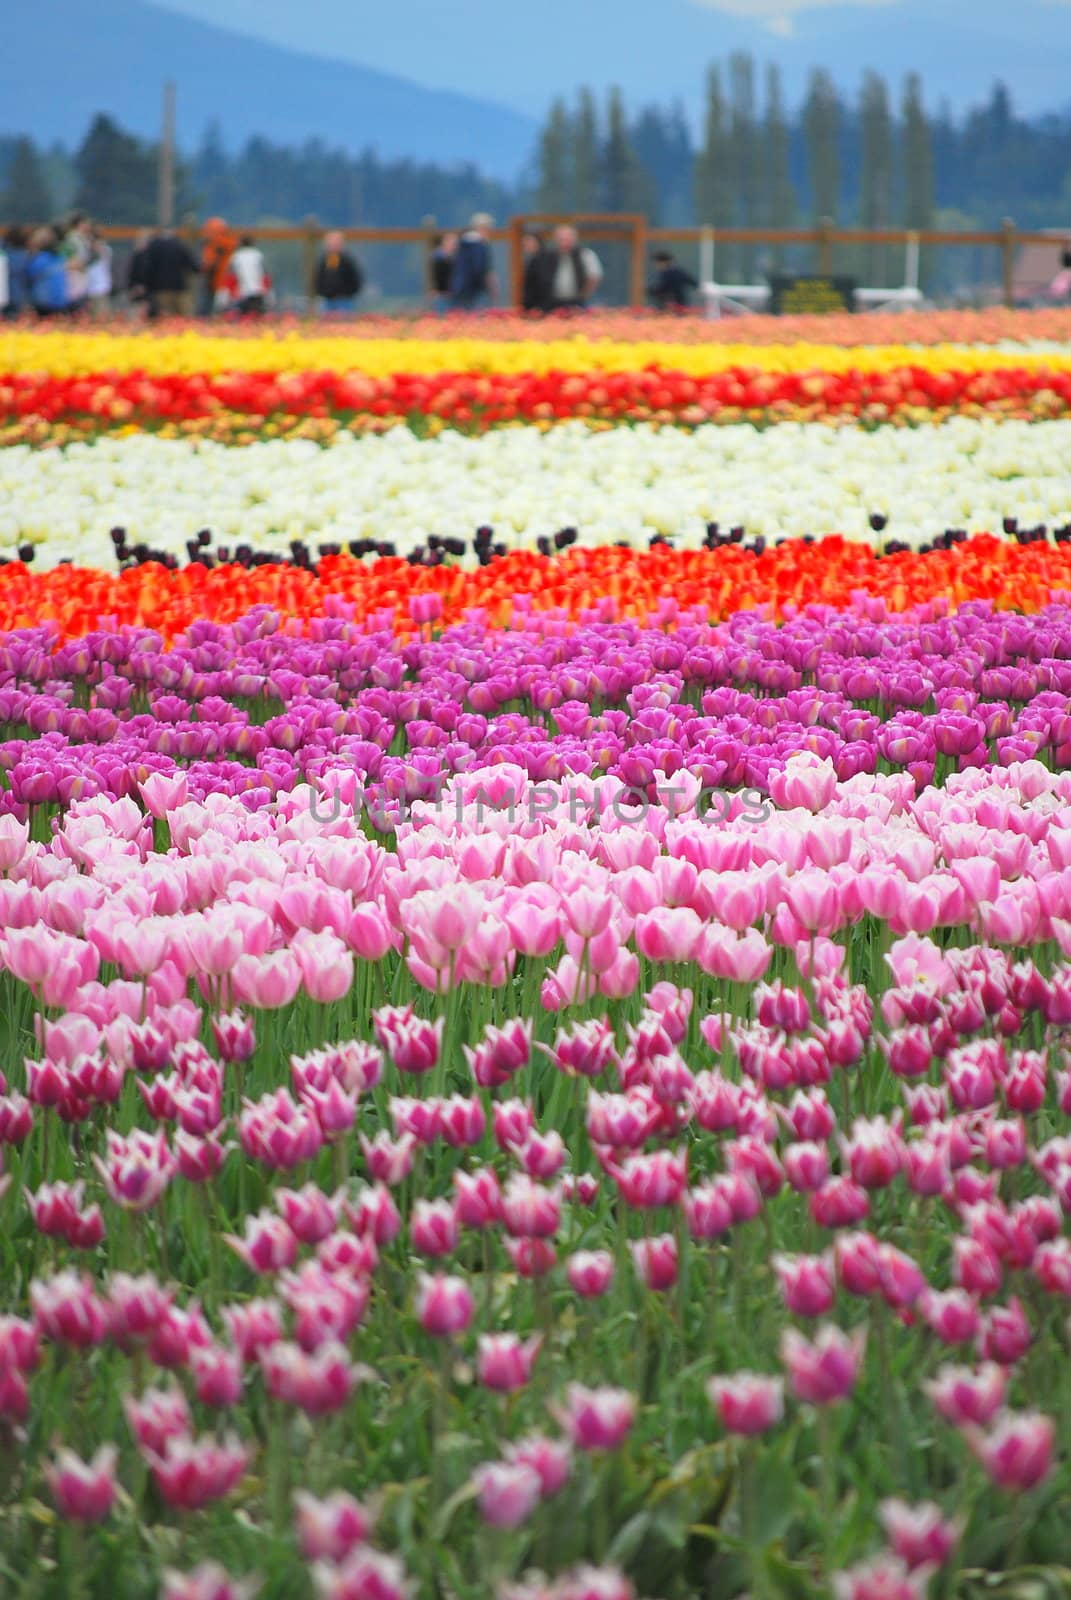 Tulips in the Netherlands.